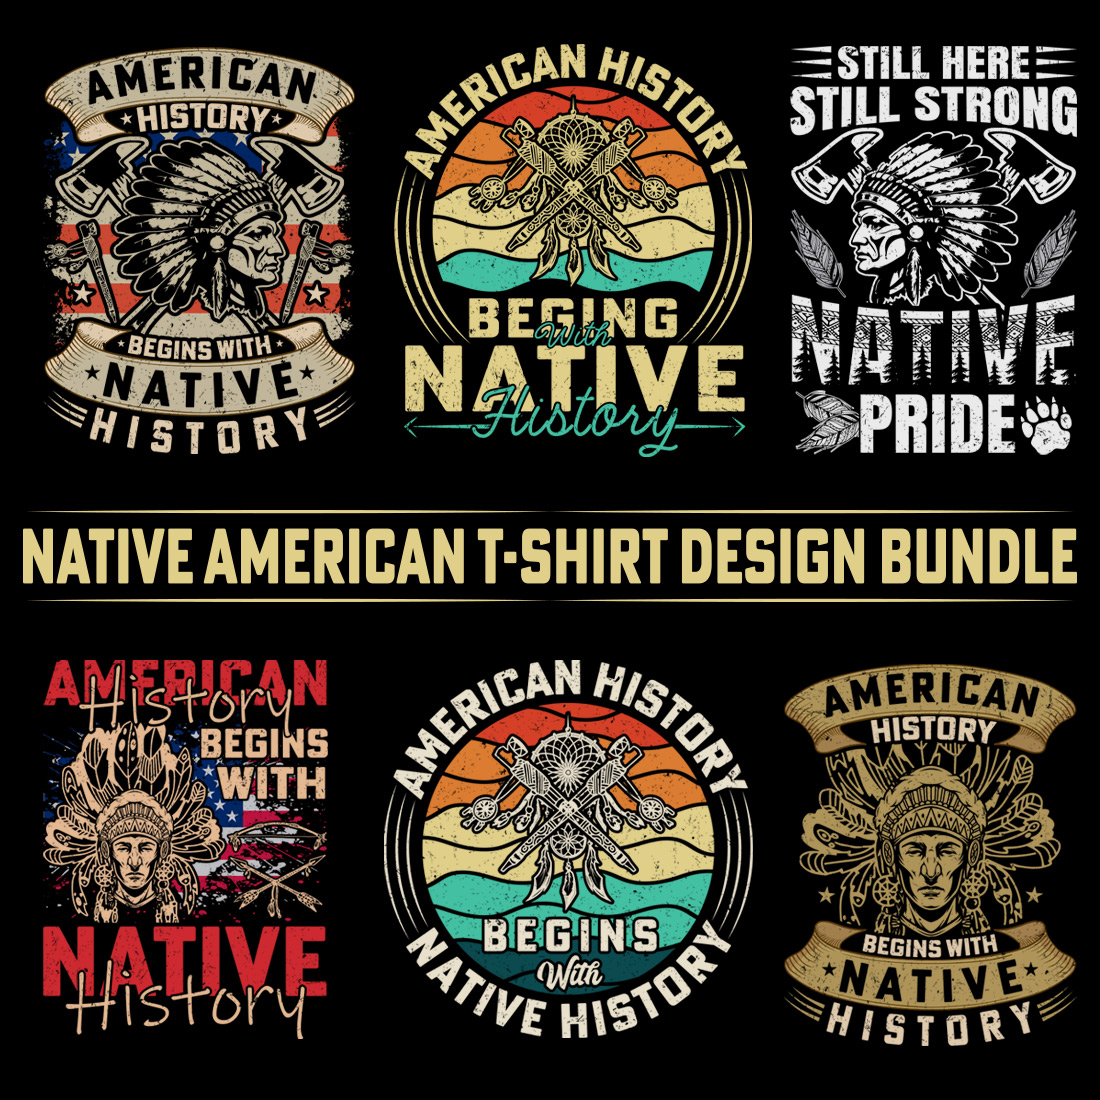 American History Begins with Native History bundle, Native American T-Shirt  bundle, Native American Pride Shirts bundle, bundle t-shirt design.